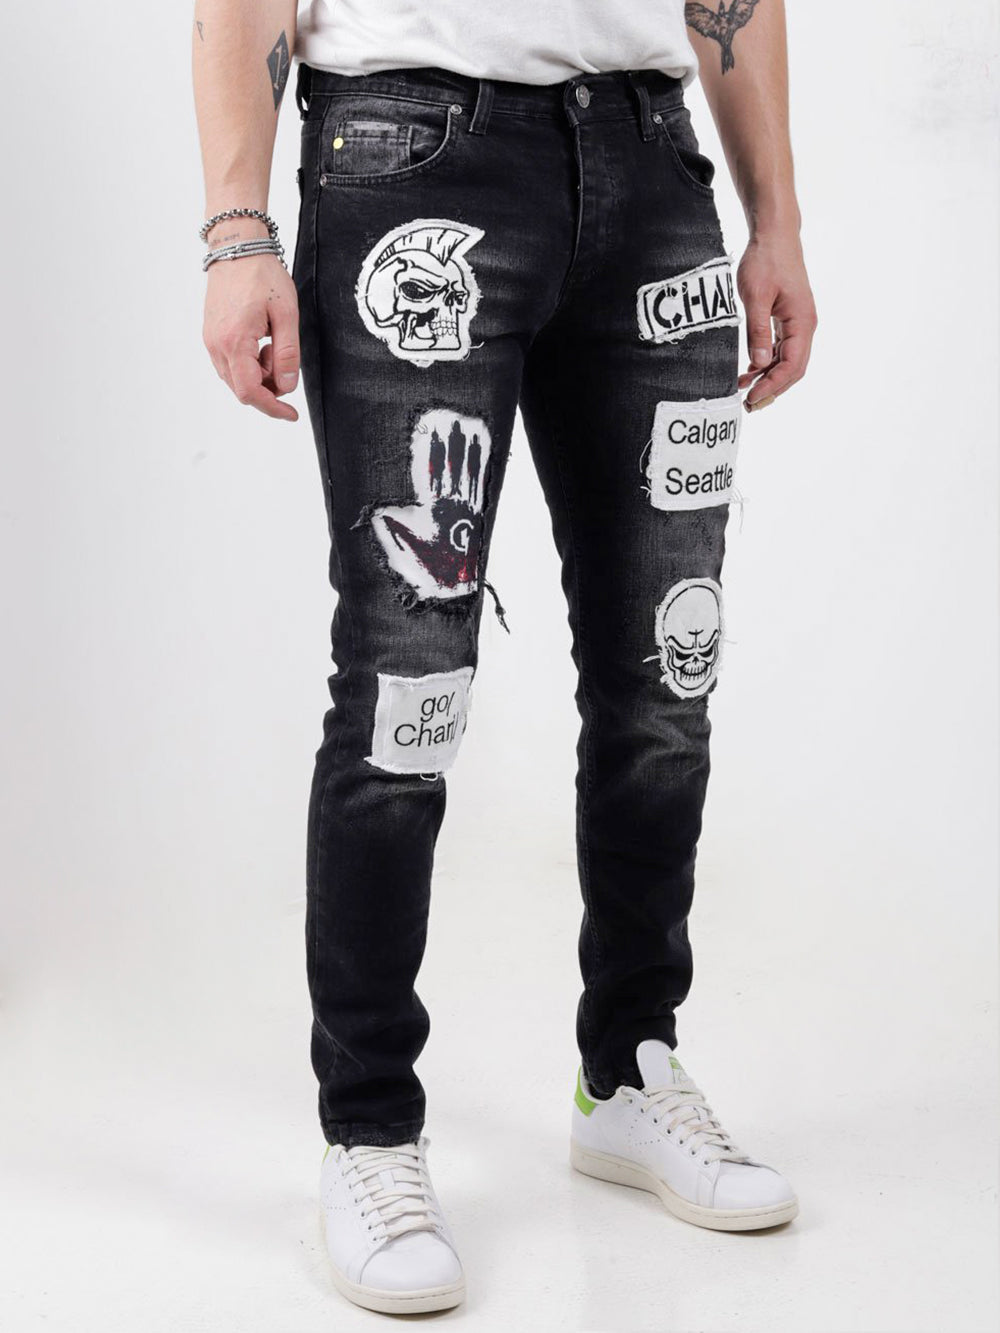 A man wearing black headstone jeans with patches on them.